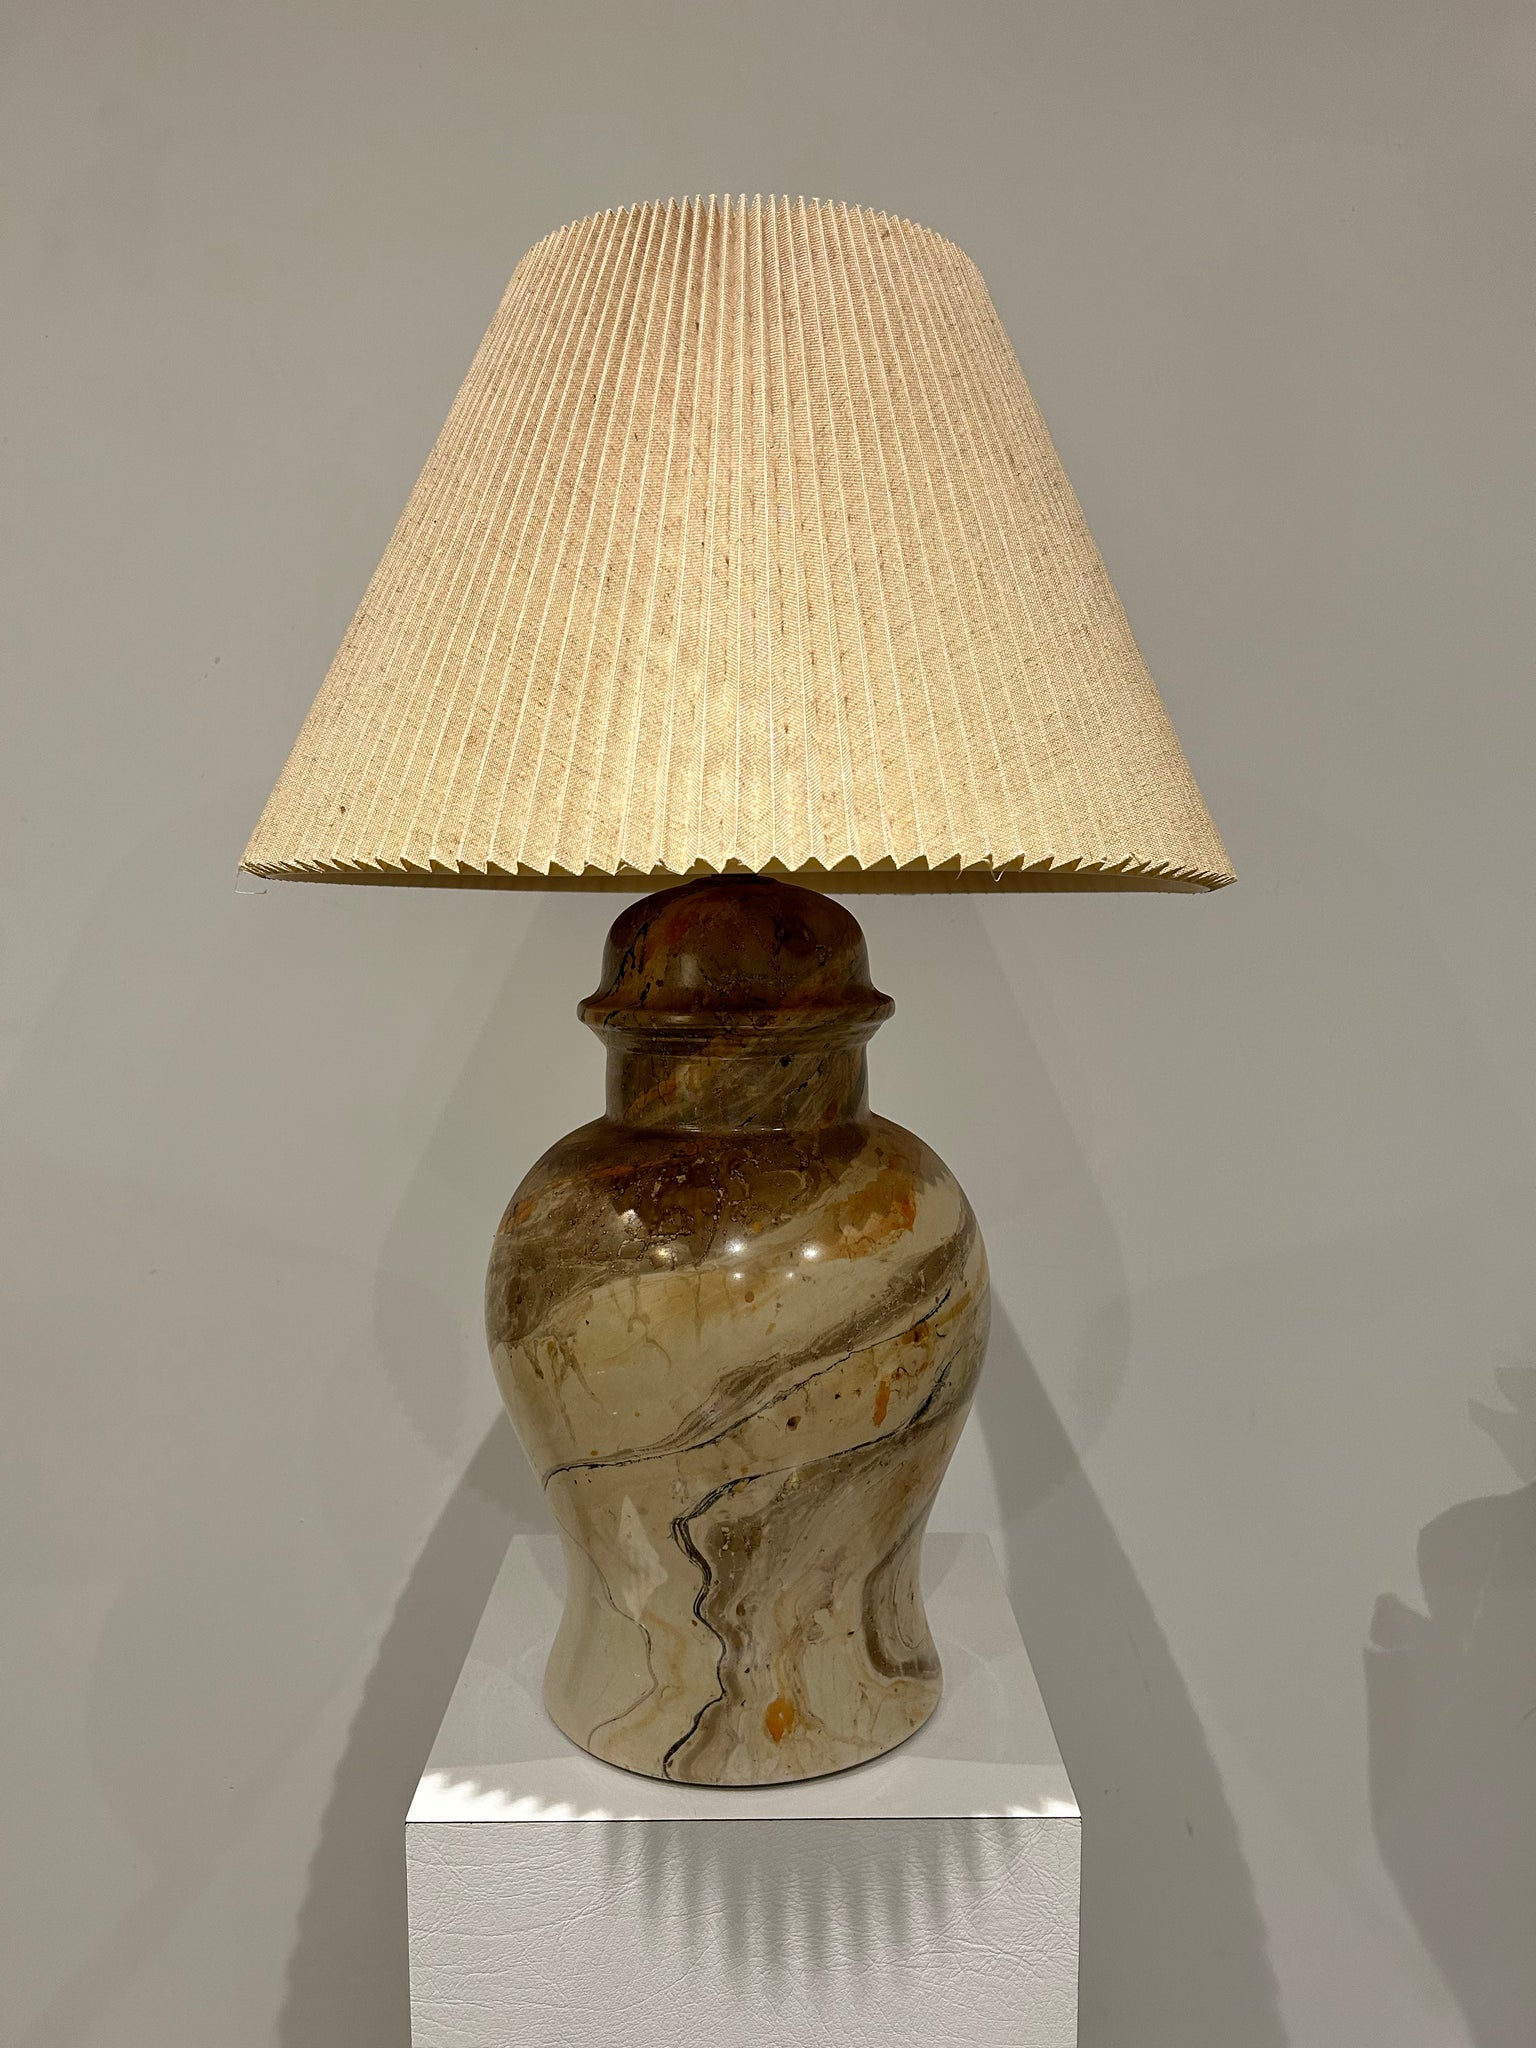 Large marbled ceramic table lamp